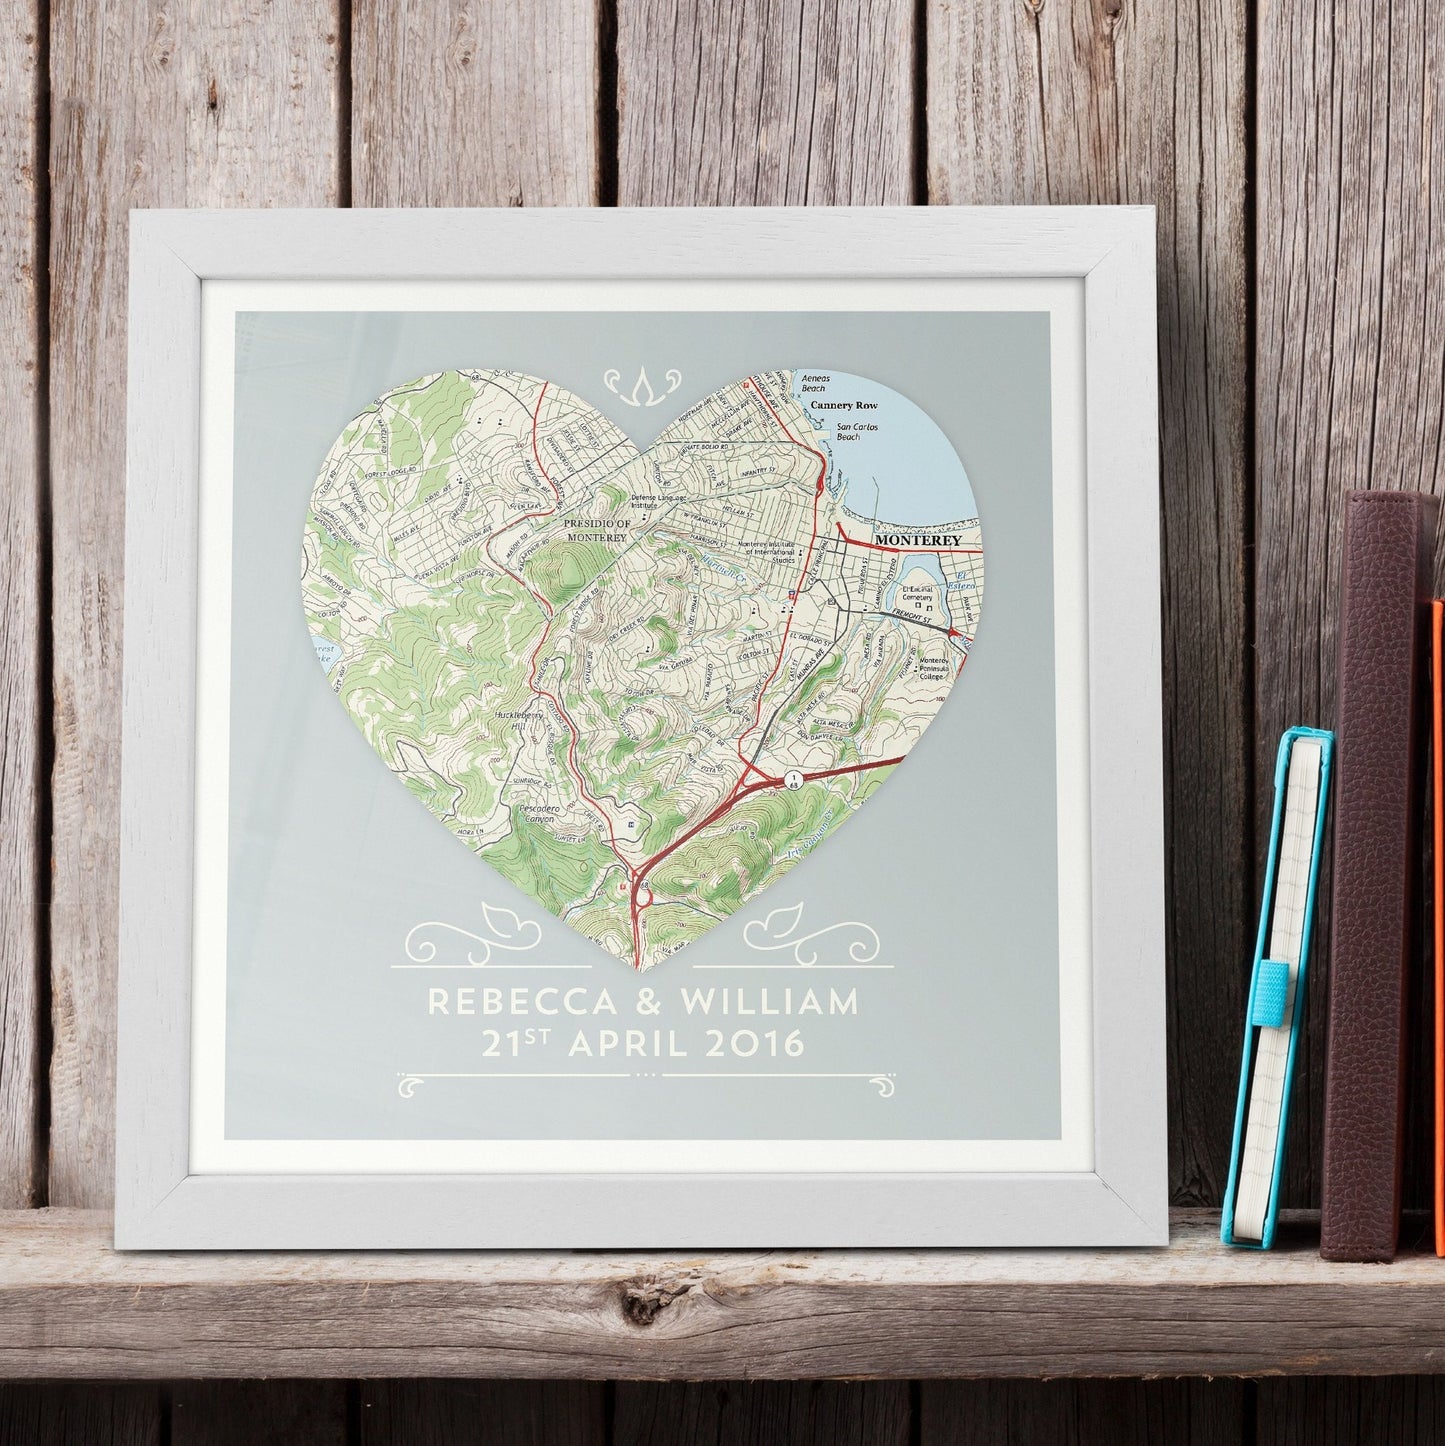 US Wall Art - Personalized Framed Heart US Map